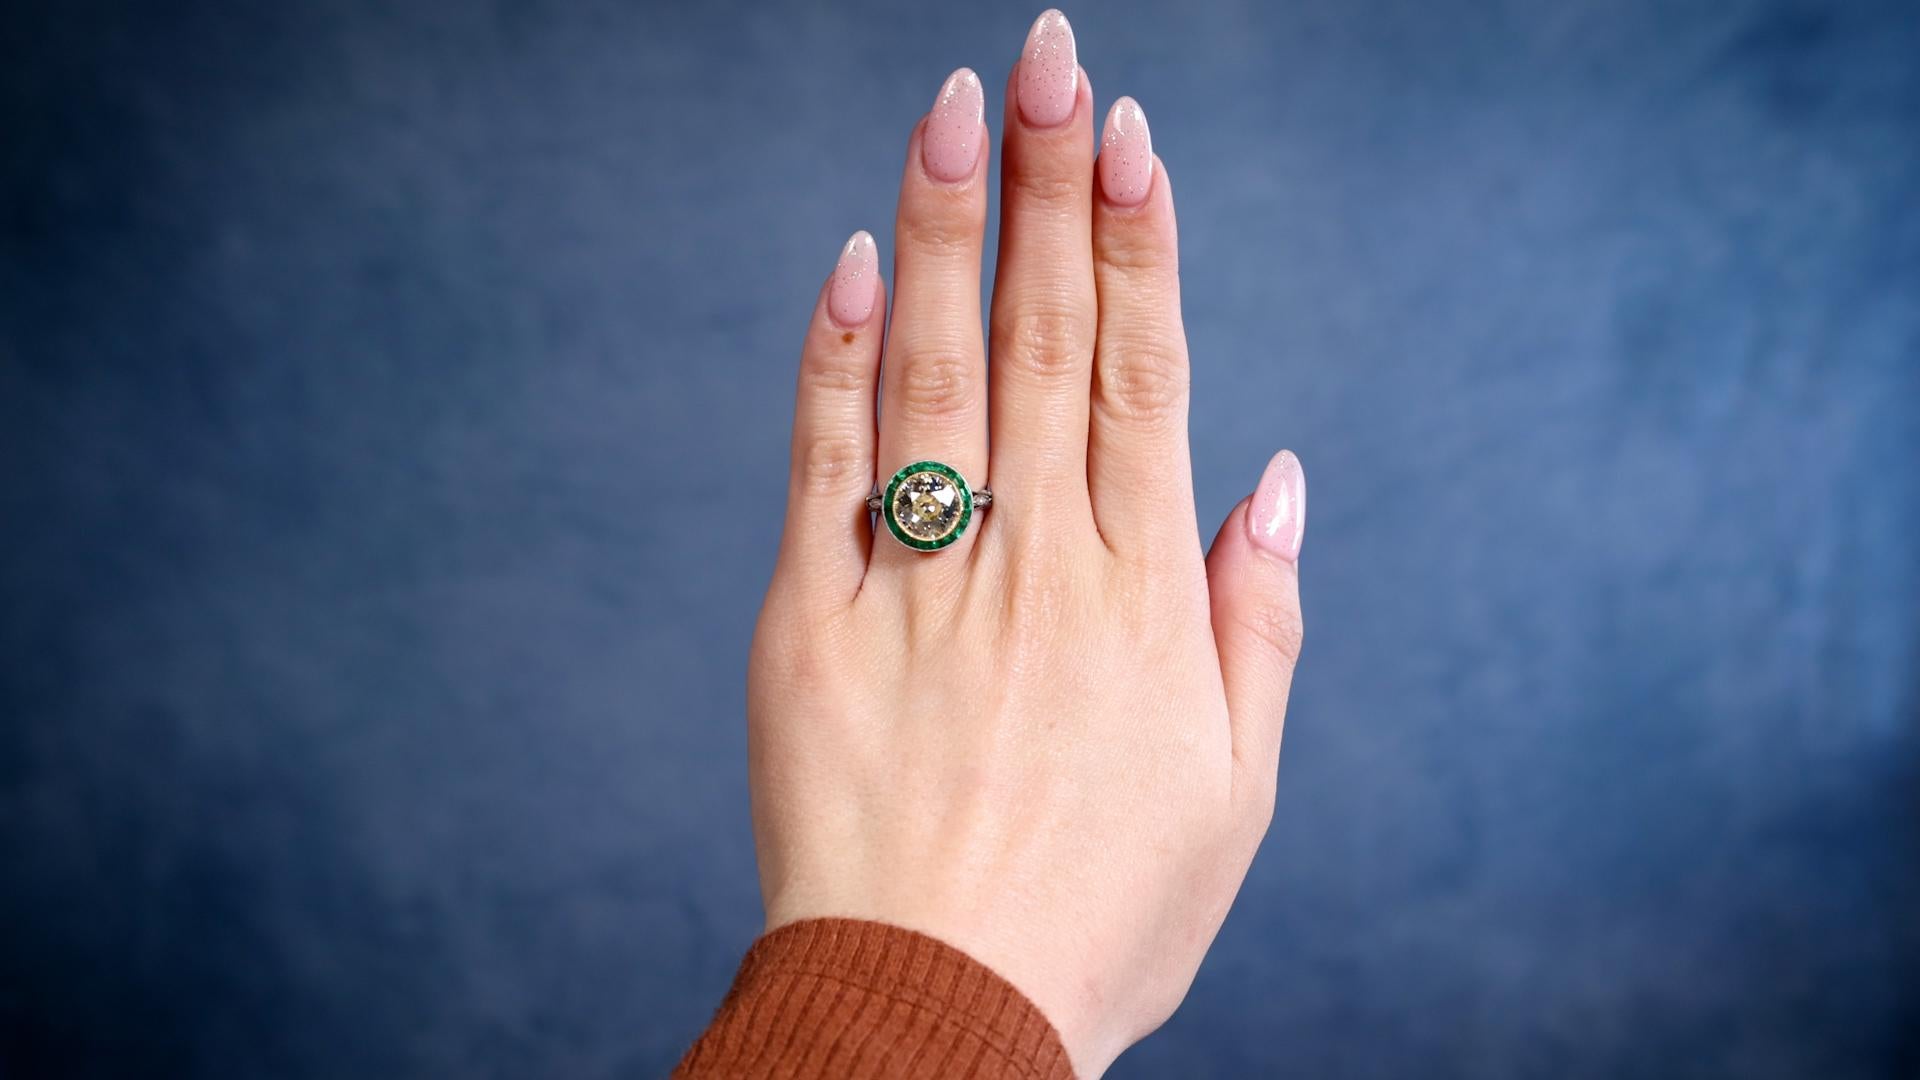 One Art Deco Inspired 3.12 Carat Old European Cut Diamond Emerald Platinum 18k Gold Target Ring. Featuring one old European cut diamond of 3.12 carats, graded O-P color, SI1 clarity. Accented by 18 calibre cut emeralds with a total weight of